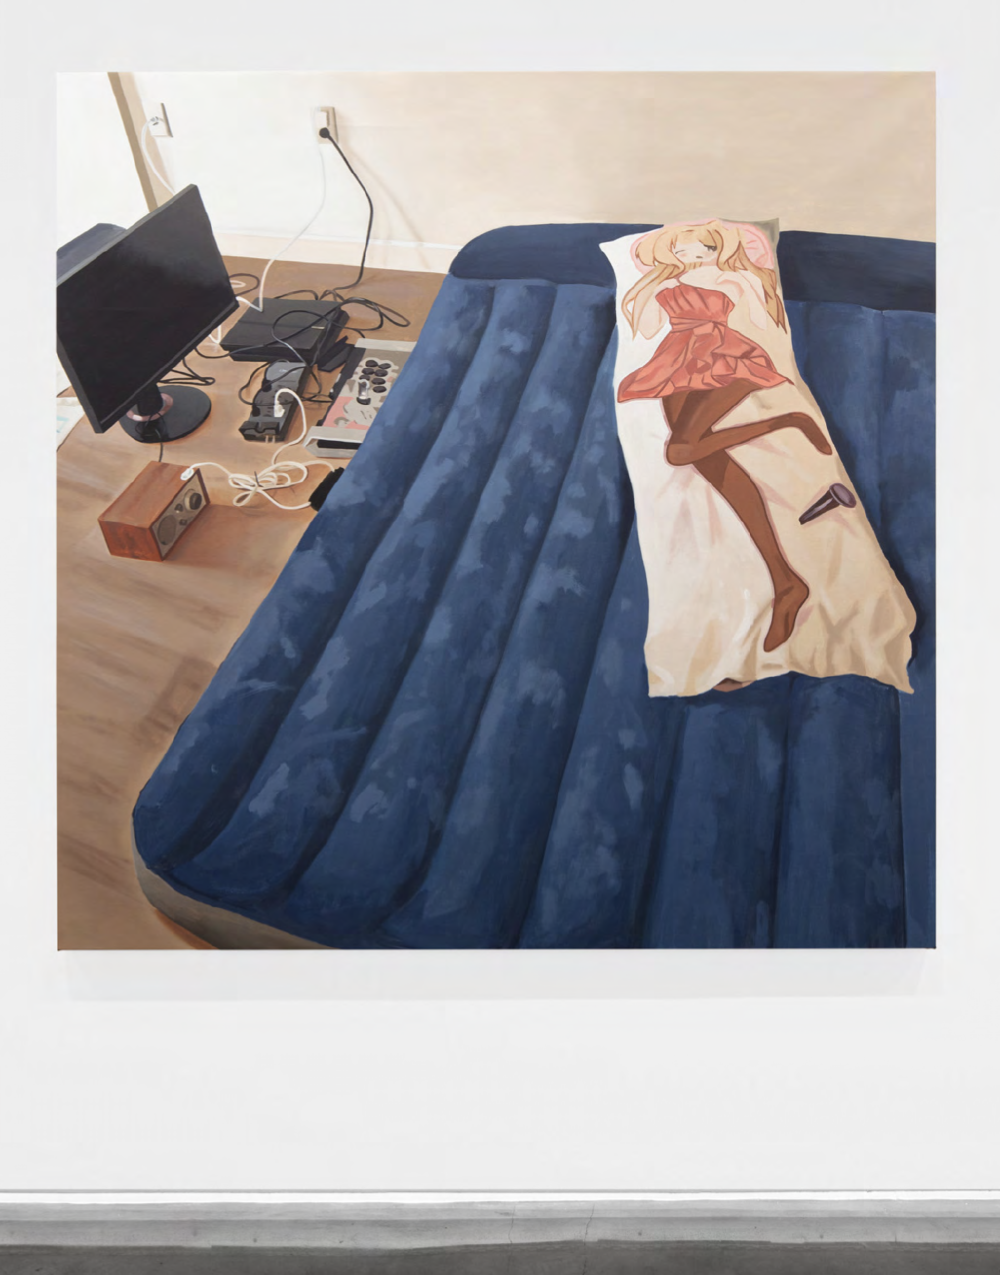 a painting of a blow up bed with an anime body pillow and a monitor and ps4 on the floor